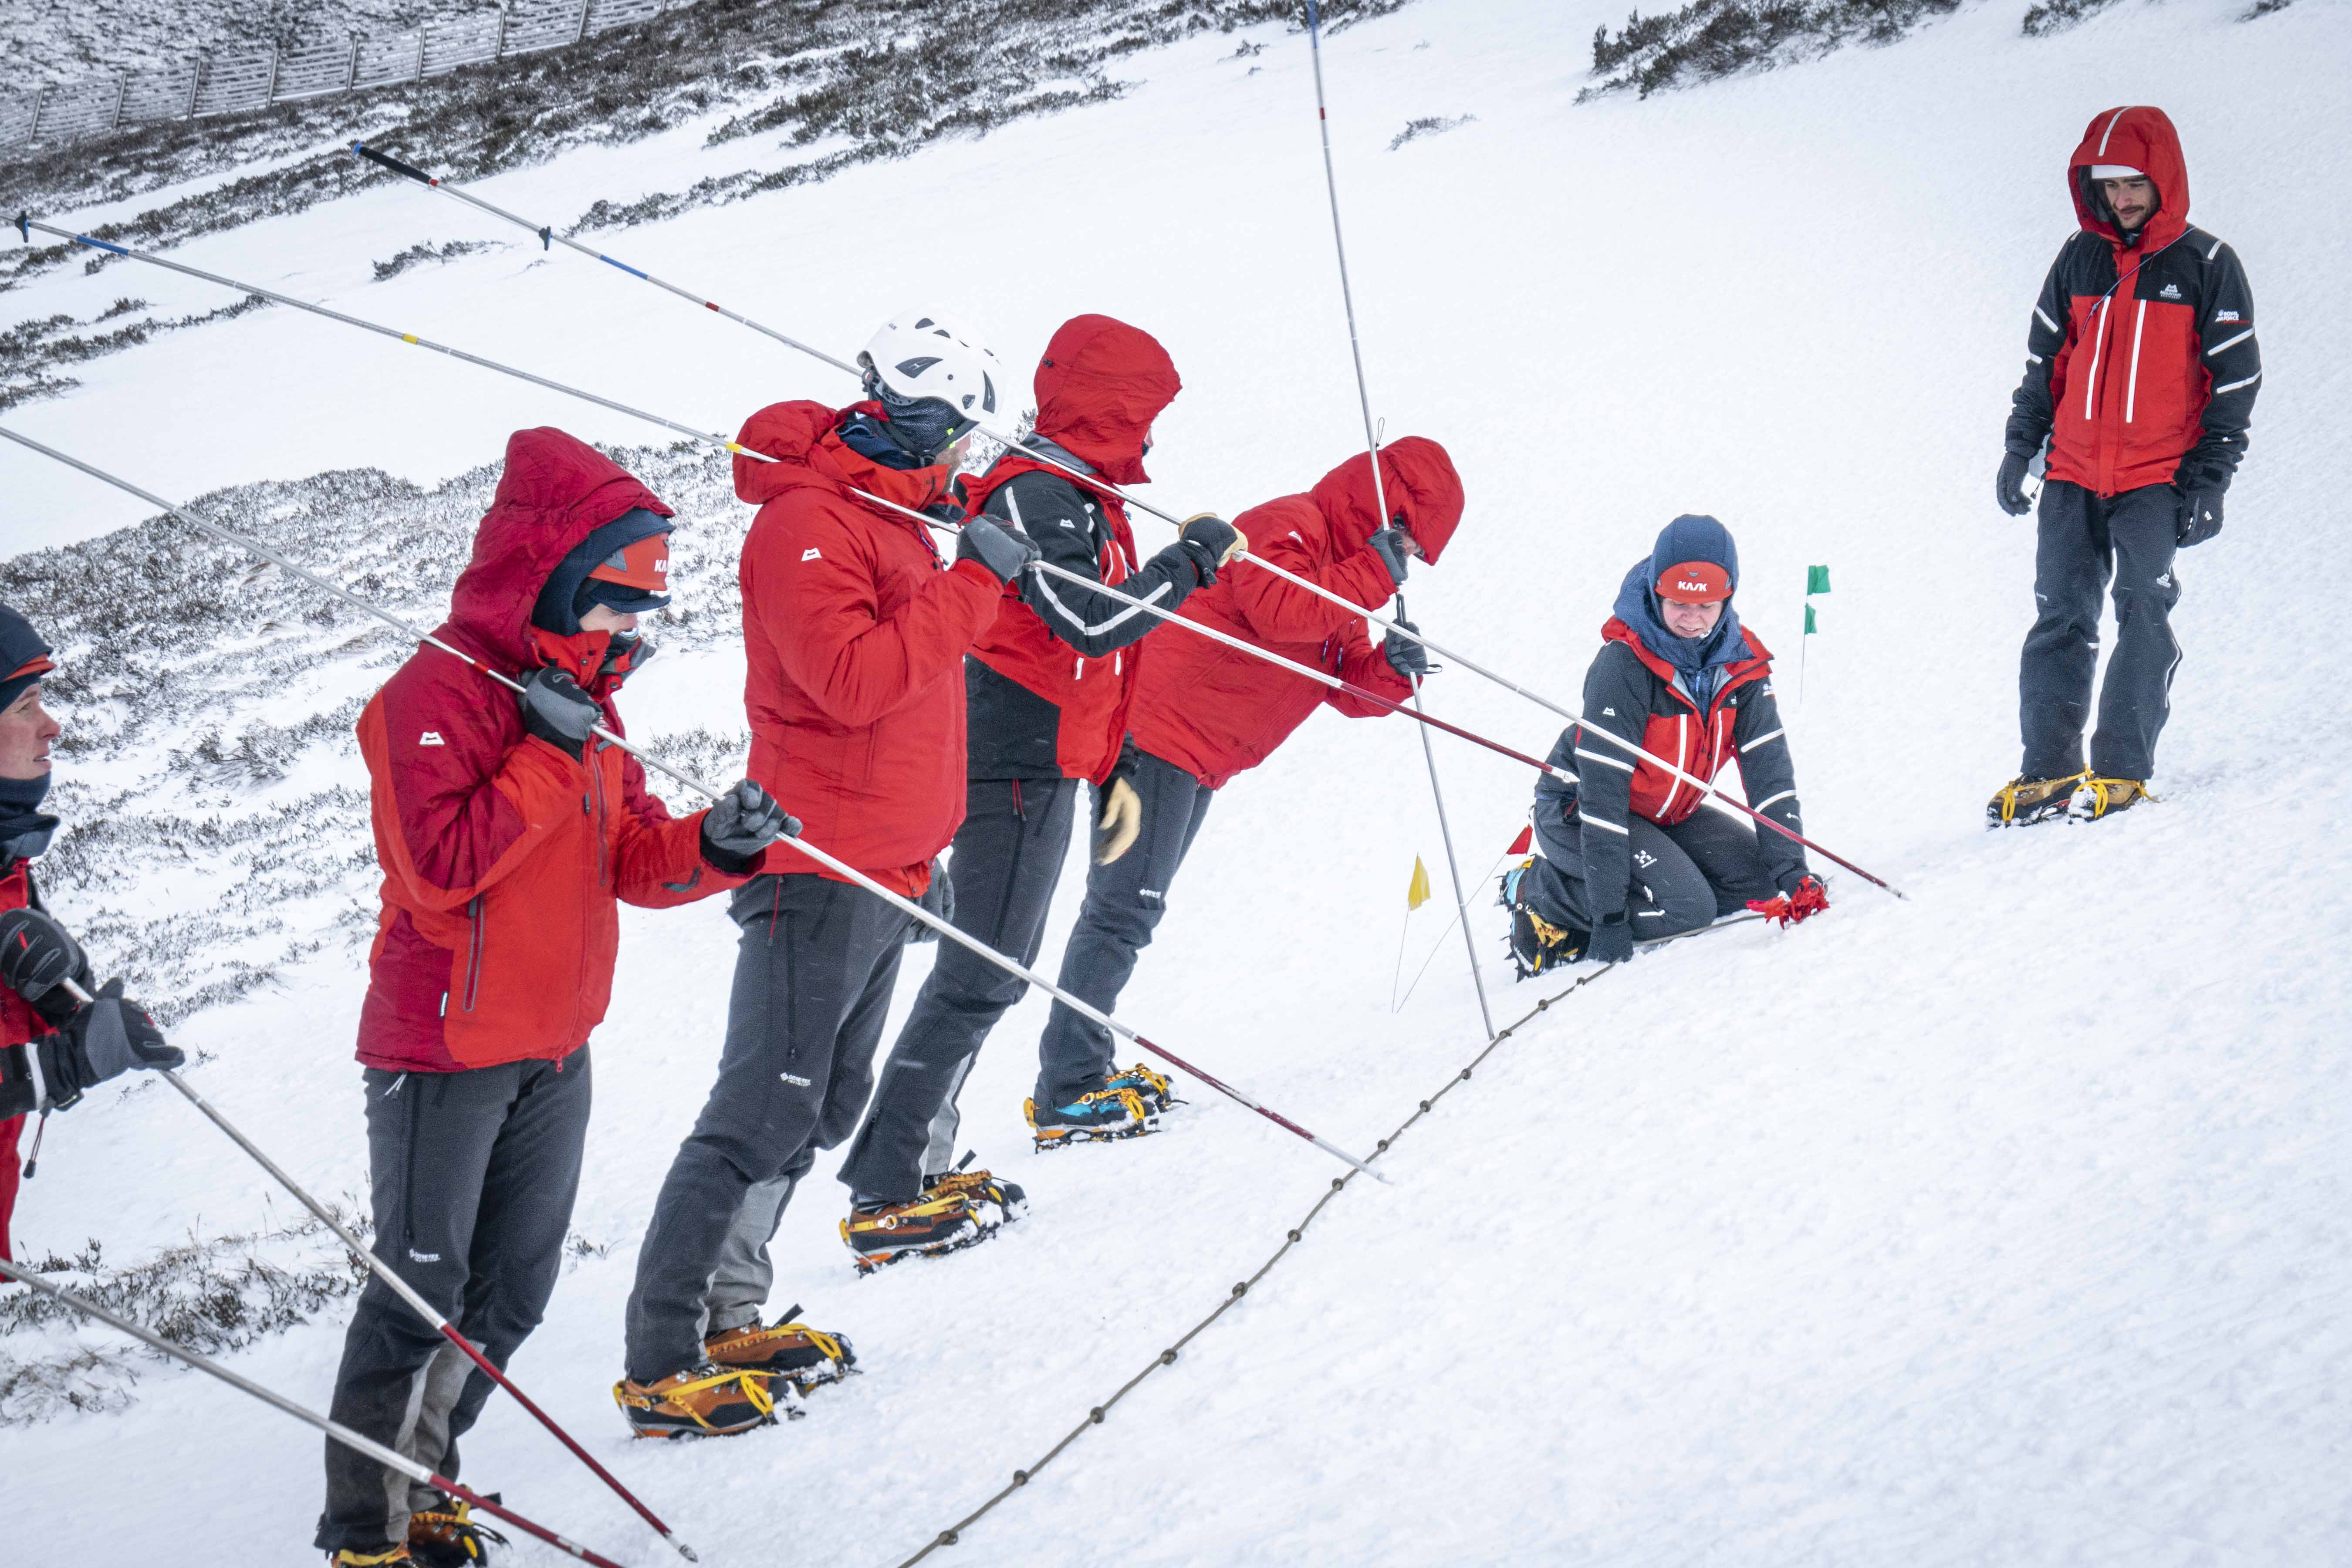 Image shows Mountain Rescue Team on a snowy mountain holding long poles and climbing equipment.